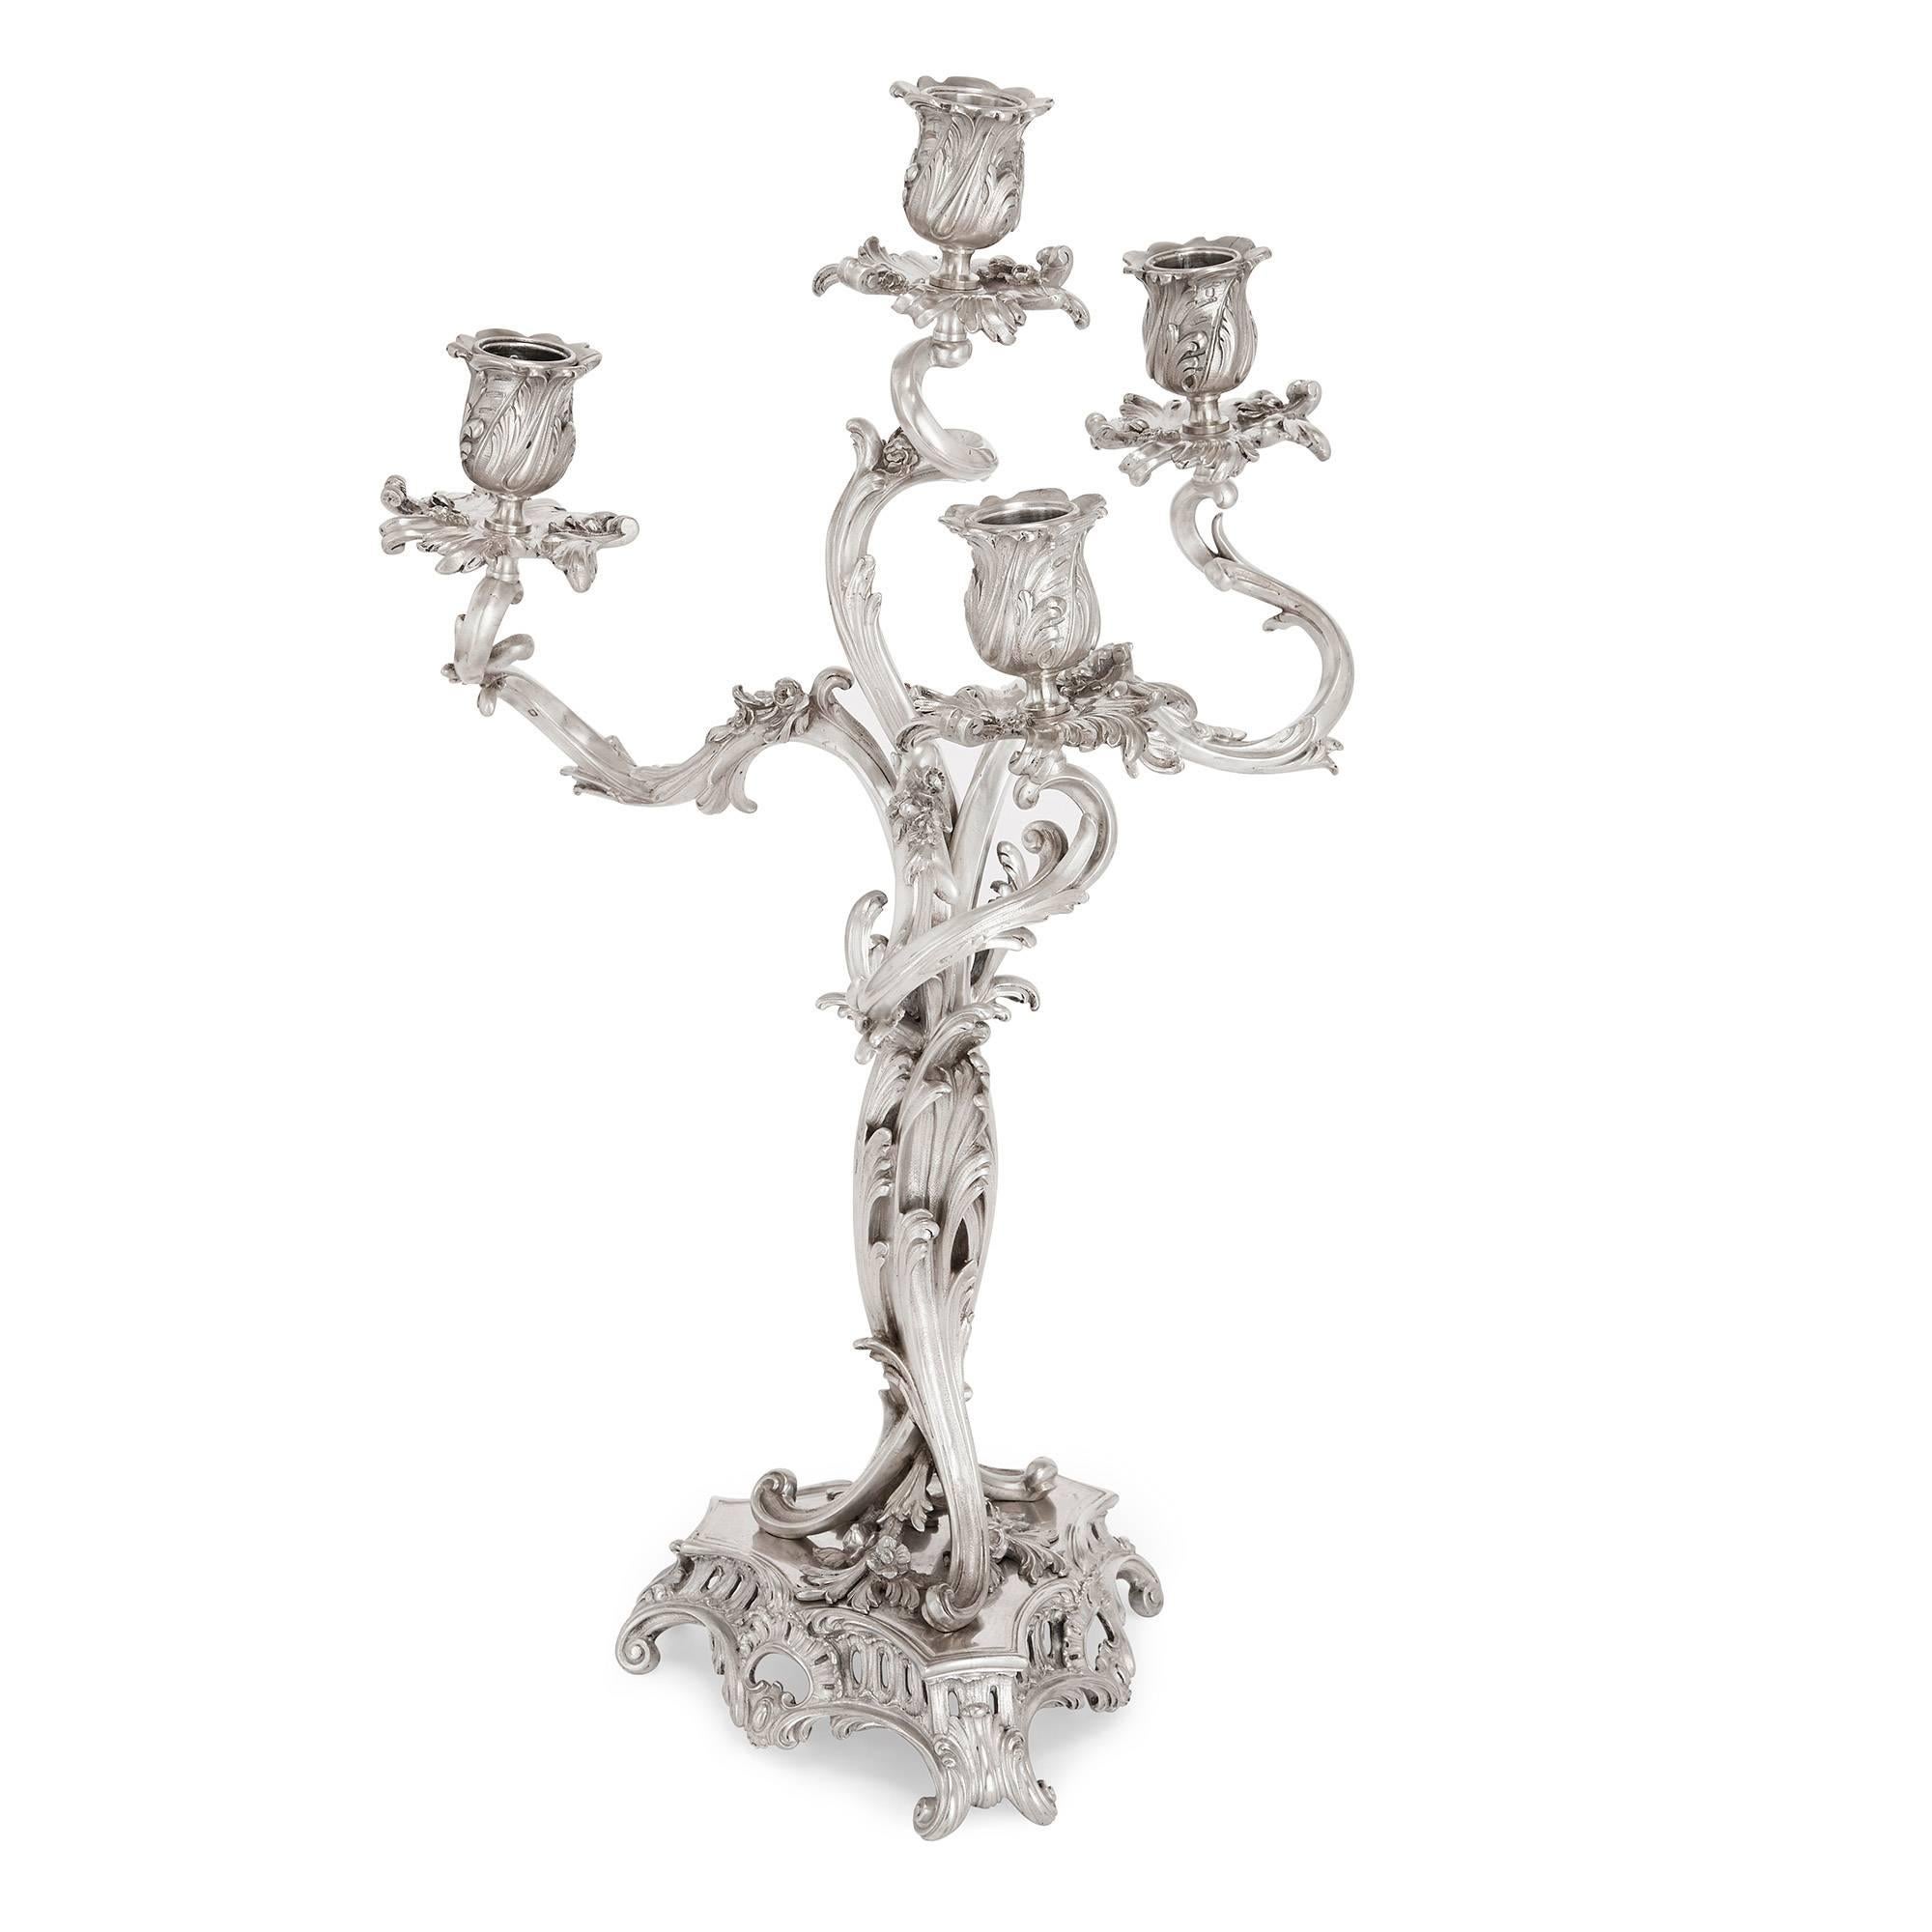 Both candelabras issuing four lights from scrolling branches, which lead to a central column and triangular base; the pair decorated asymmetrically throughout with leaves and flowers and marked 'Cardeilhac / Paris', with further hallmarks for Ernest